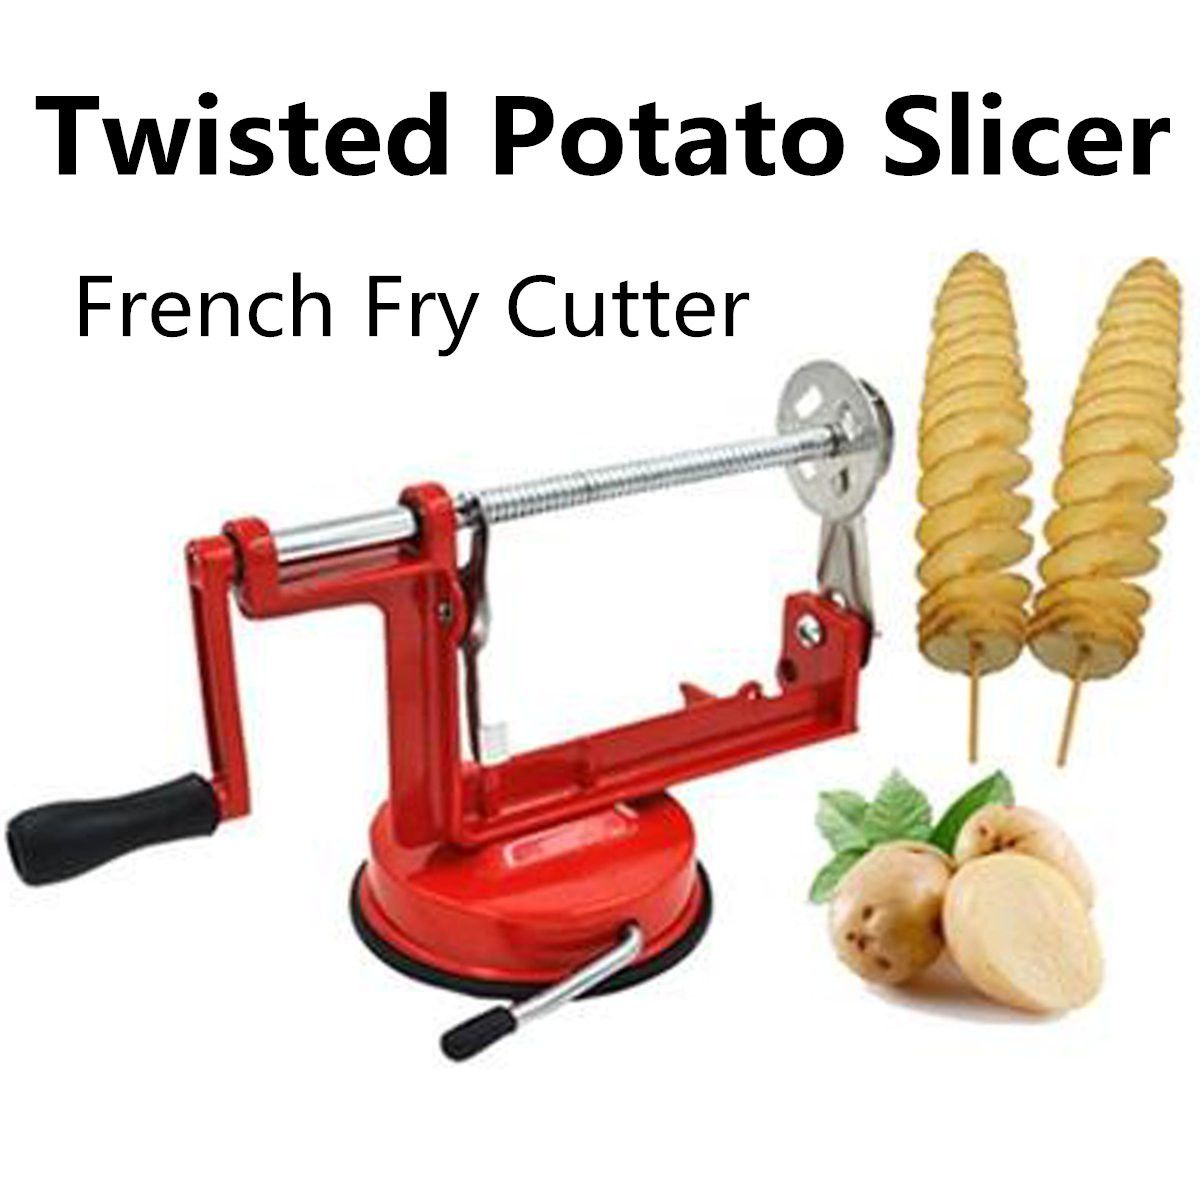 Manual-Blade-Twisted-Potato-Slicer-Stainless-Steel-Spiral-Cutter-Tool-1143505